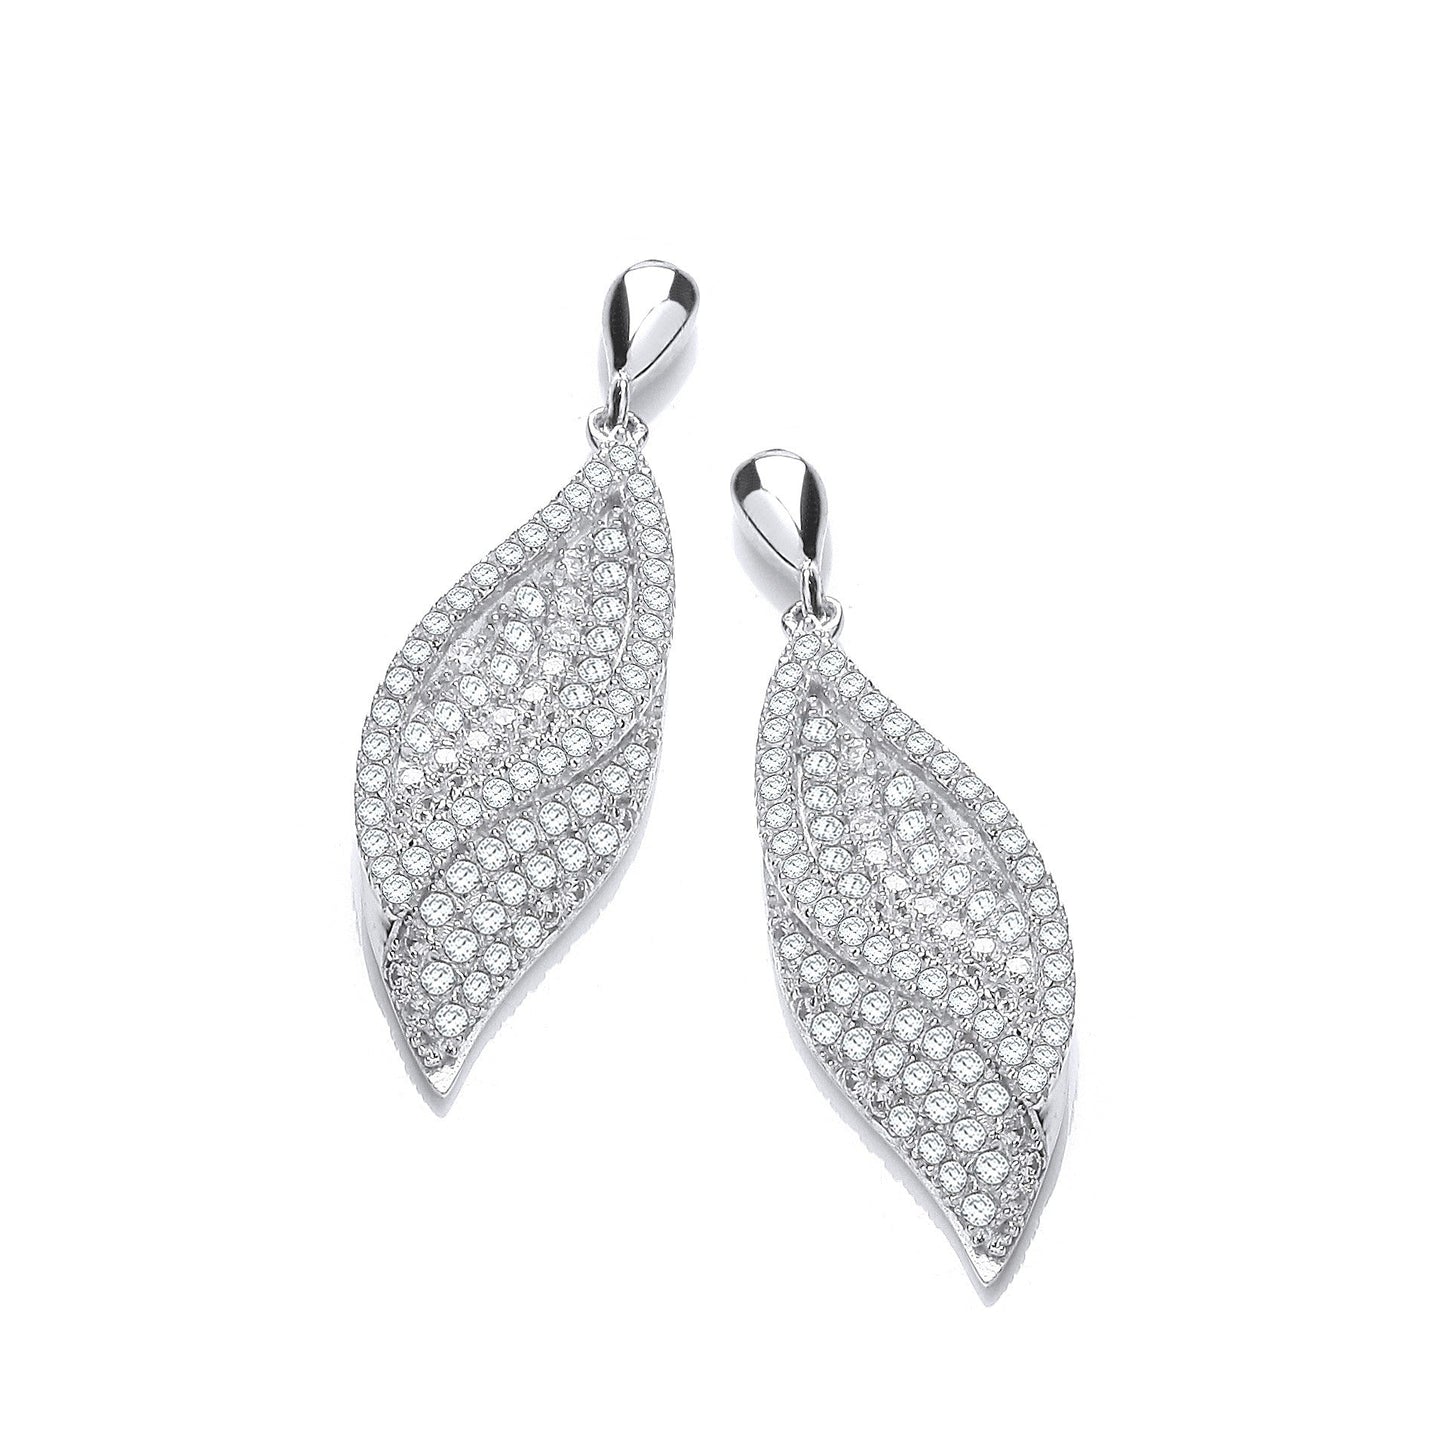 Drop 925 Sterling Silver Leaf Design Earrings Set With CZs - FJewellery